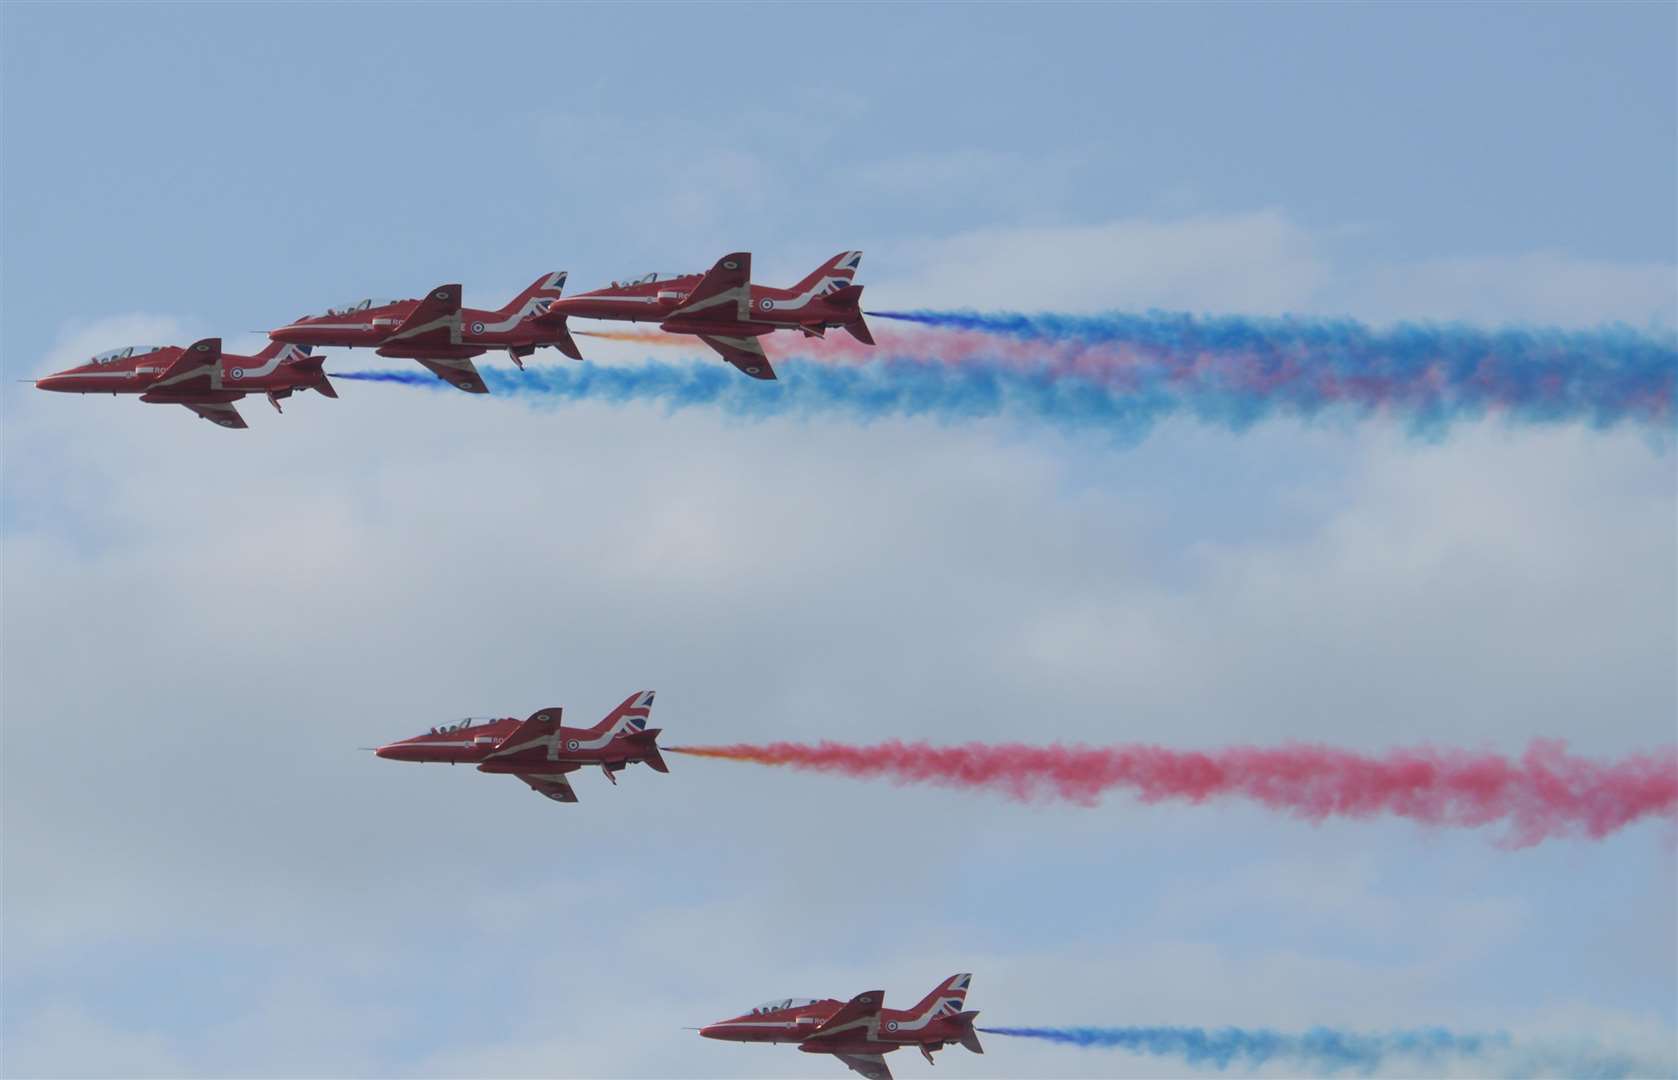 The Red Arrows thrill the crowds at the Herne Bay air show - but will they return?